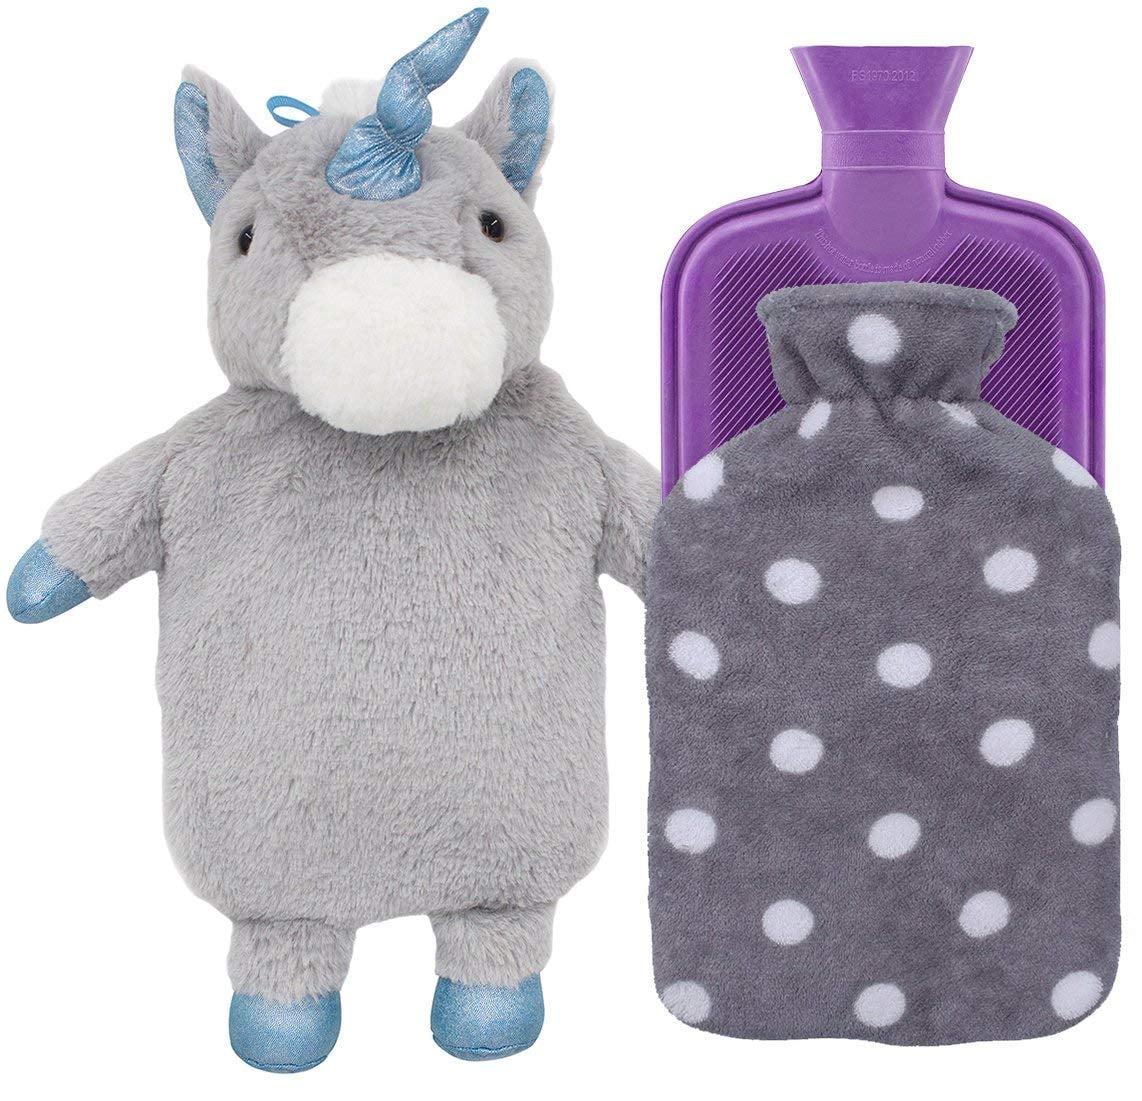 Premium Hot Water Bottle With Cover, 800ml Hot Water Bottle With Soft Plush  Cover, Bed Bottle With Fleece Cover For Kids And Adults, Pain Relief, Hot